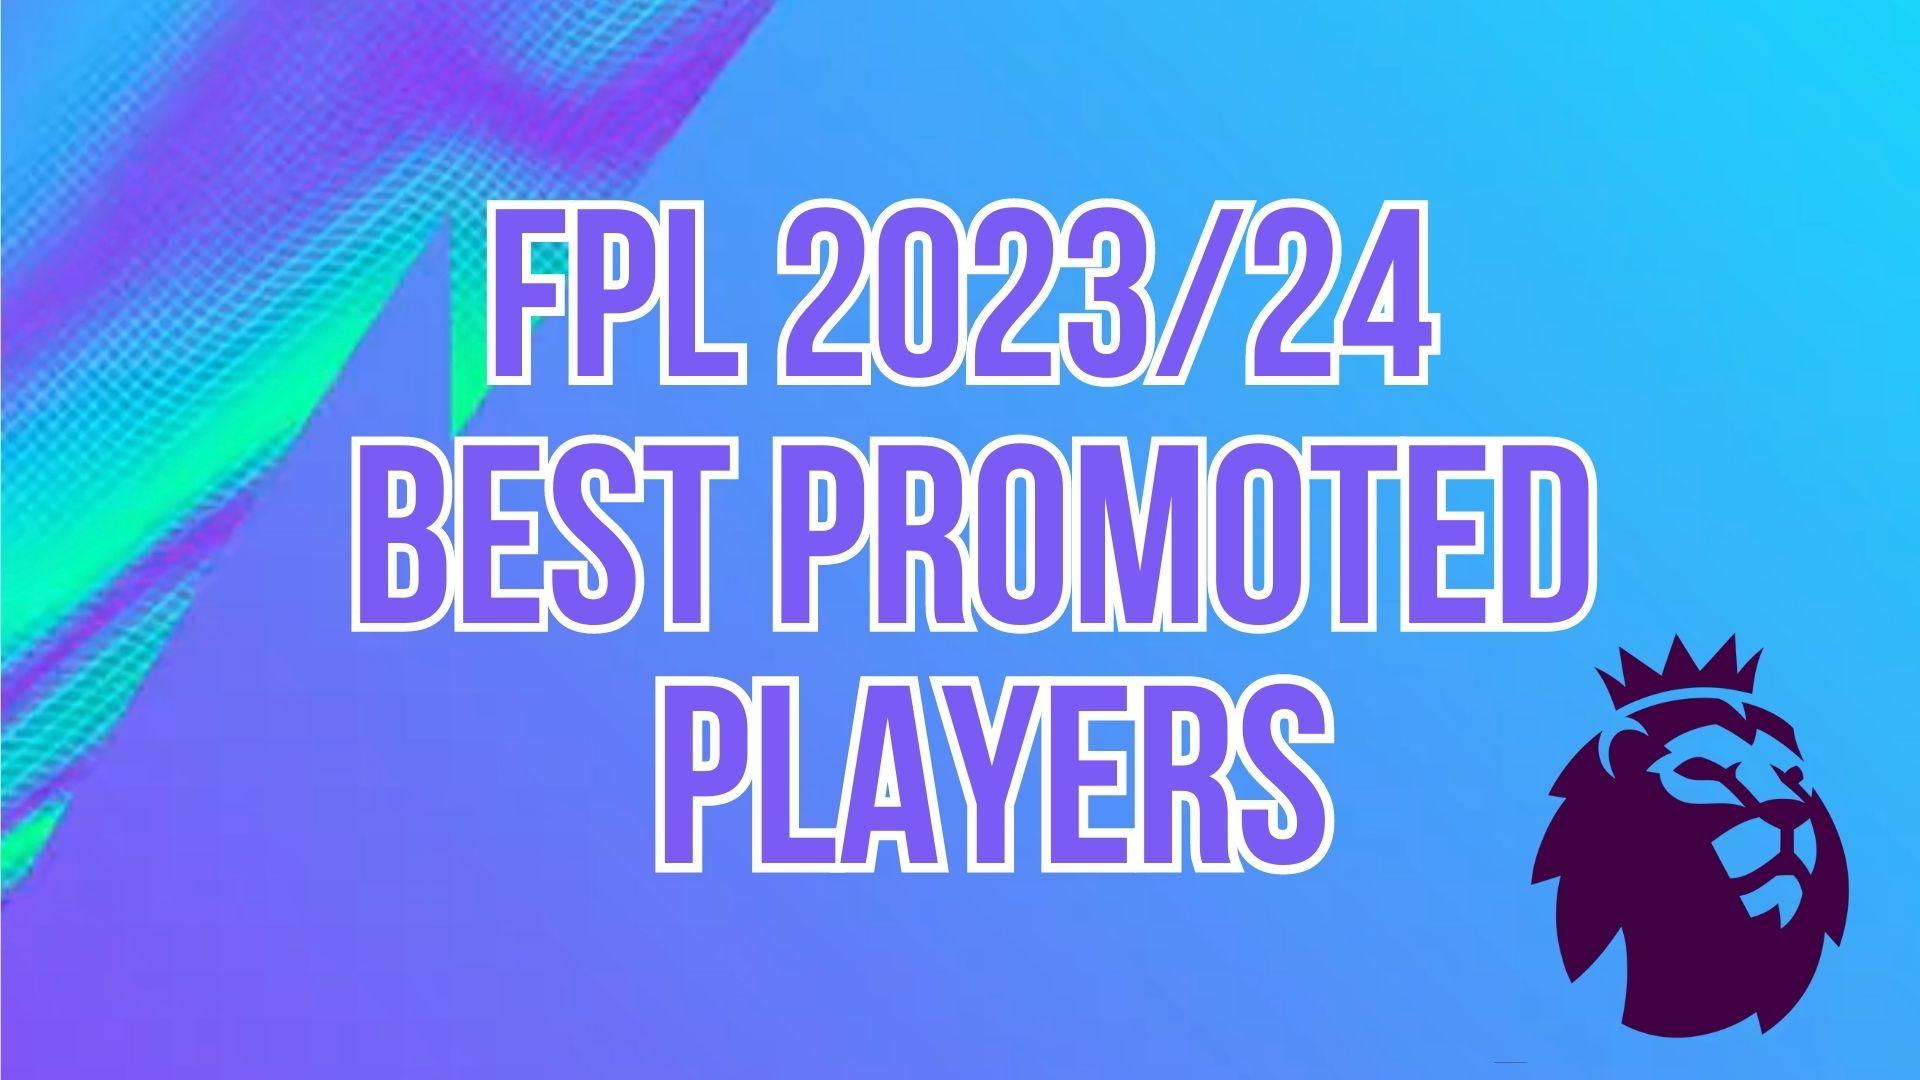 Premier League logo and graphics with Best Promoted Players text